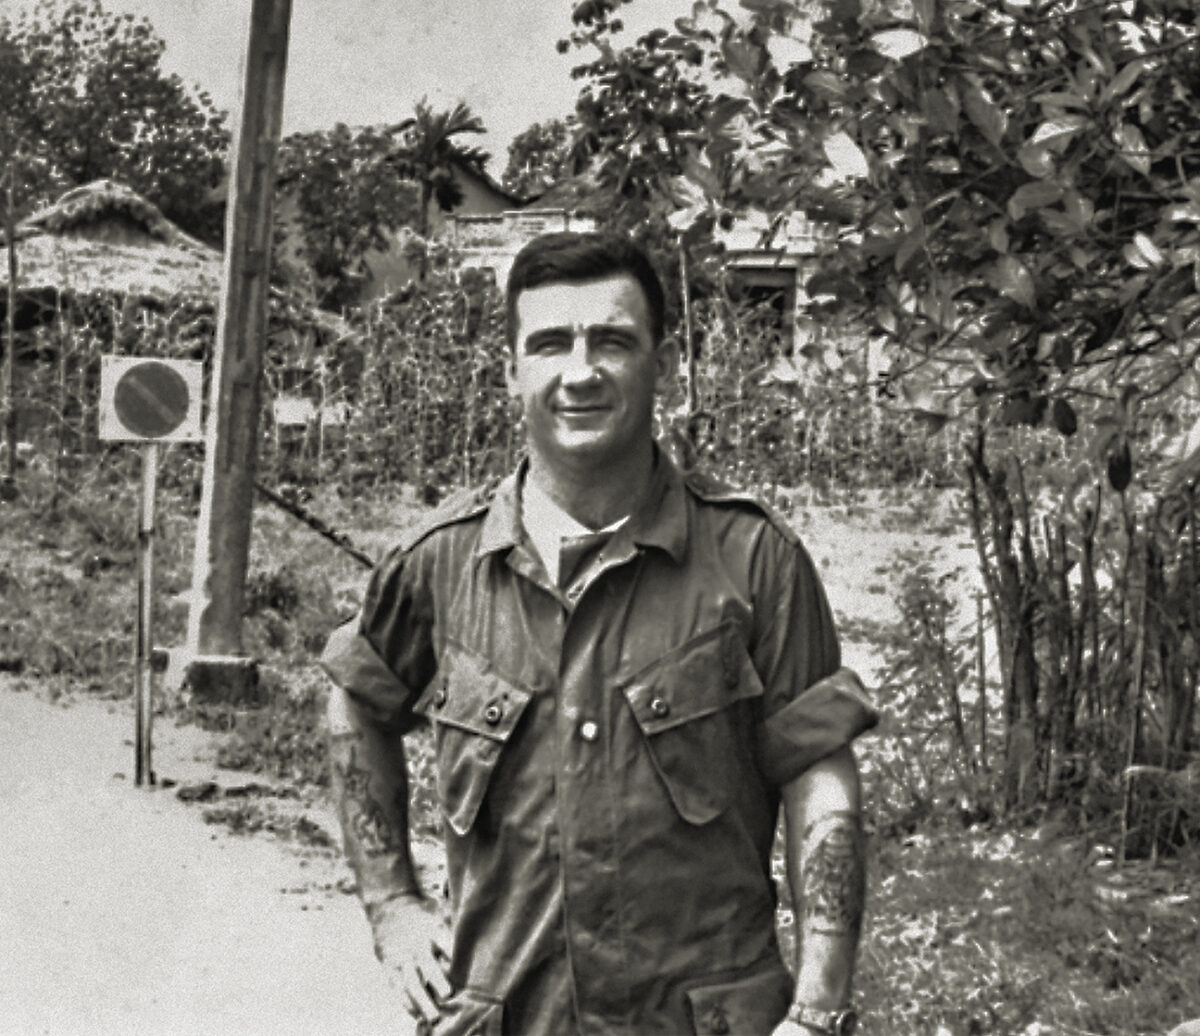 Photo of Warrant Officer Class II, (WO2), Kevin (Dasher) Arthur Wheatley VC, a member of the Australian Army Training Team, Vietnam, (AATTV) standing on the roadside near Saigon. WO2 Wheatley was awarded a Victoria Cross (VC) posthumously for action against the Viet Cong. He moved a wounded soldier, WO2 R. J. Swanton, from the open paddy fields into a wooded area and remained with him knowing the Viet Cong were moving in on their position.